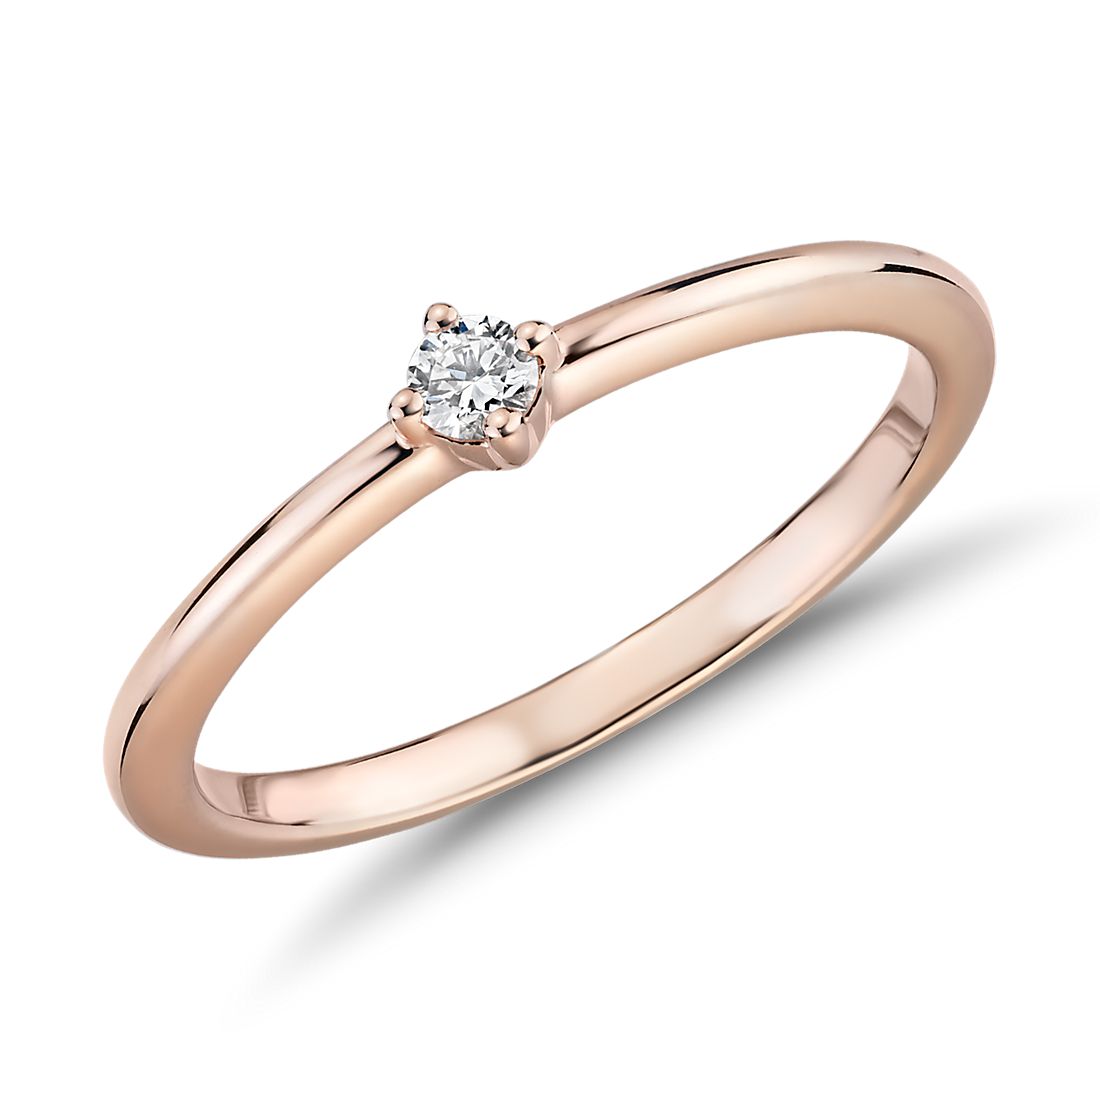 Stackable Metal Fashion Ring in 14K Rose Gold Size 6 